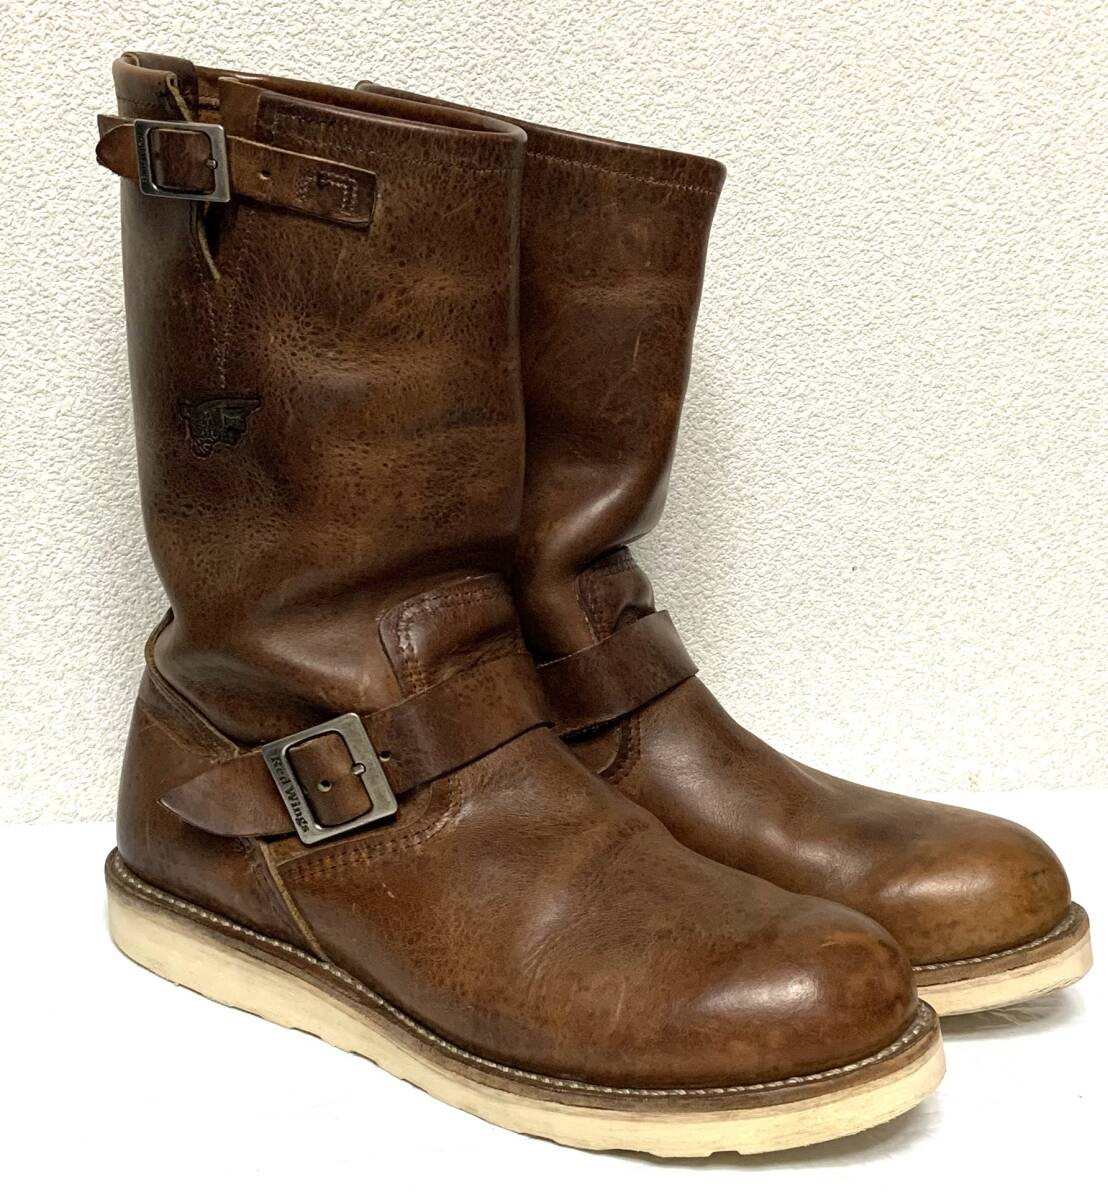 [11/D]2971 RED WING engineer * Red Wing Harley gpz 900 boots 